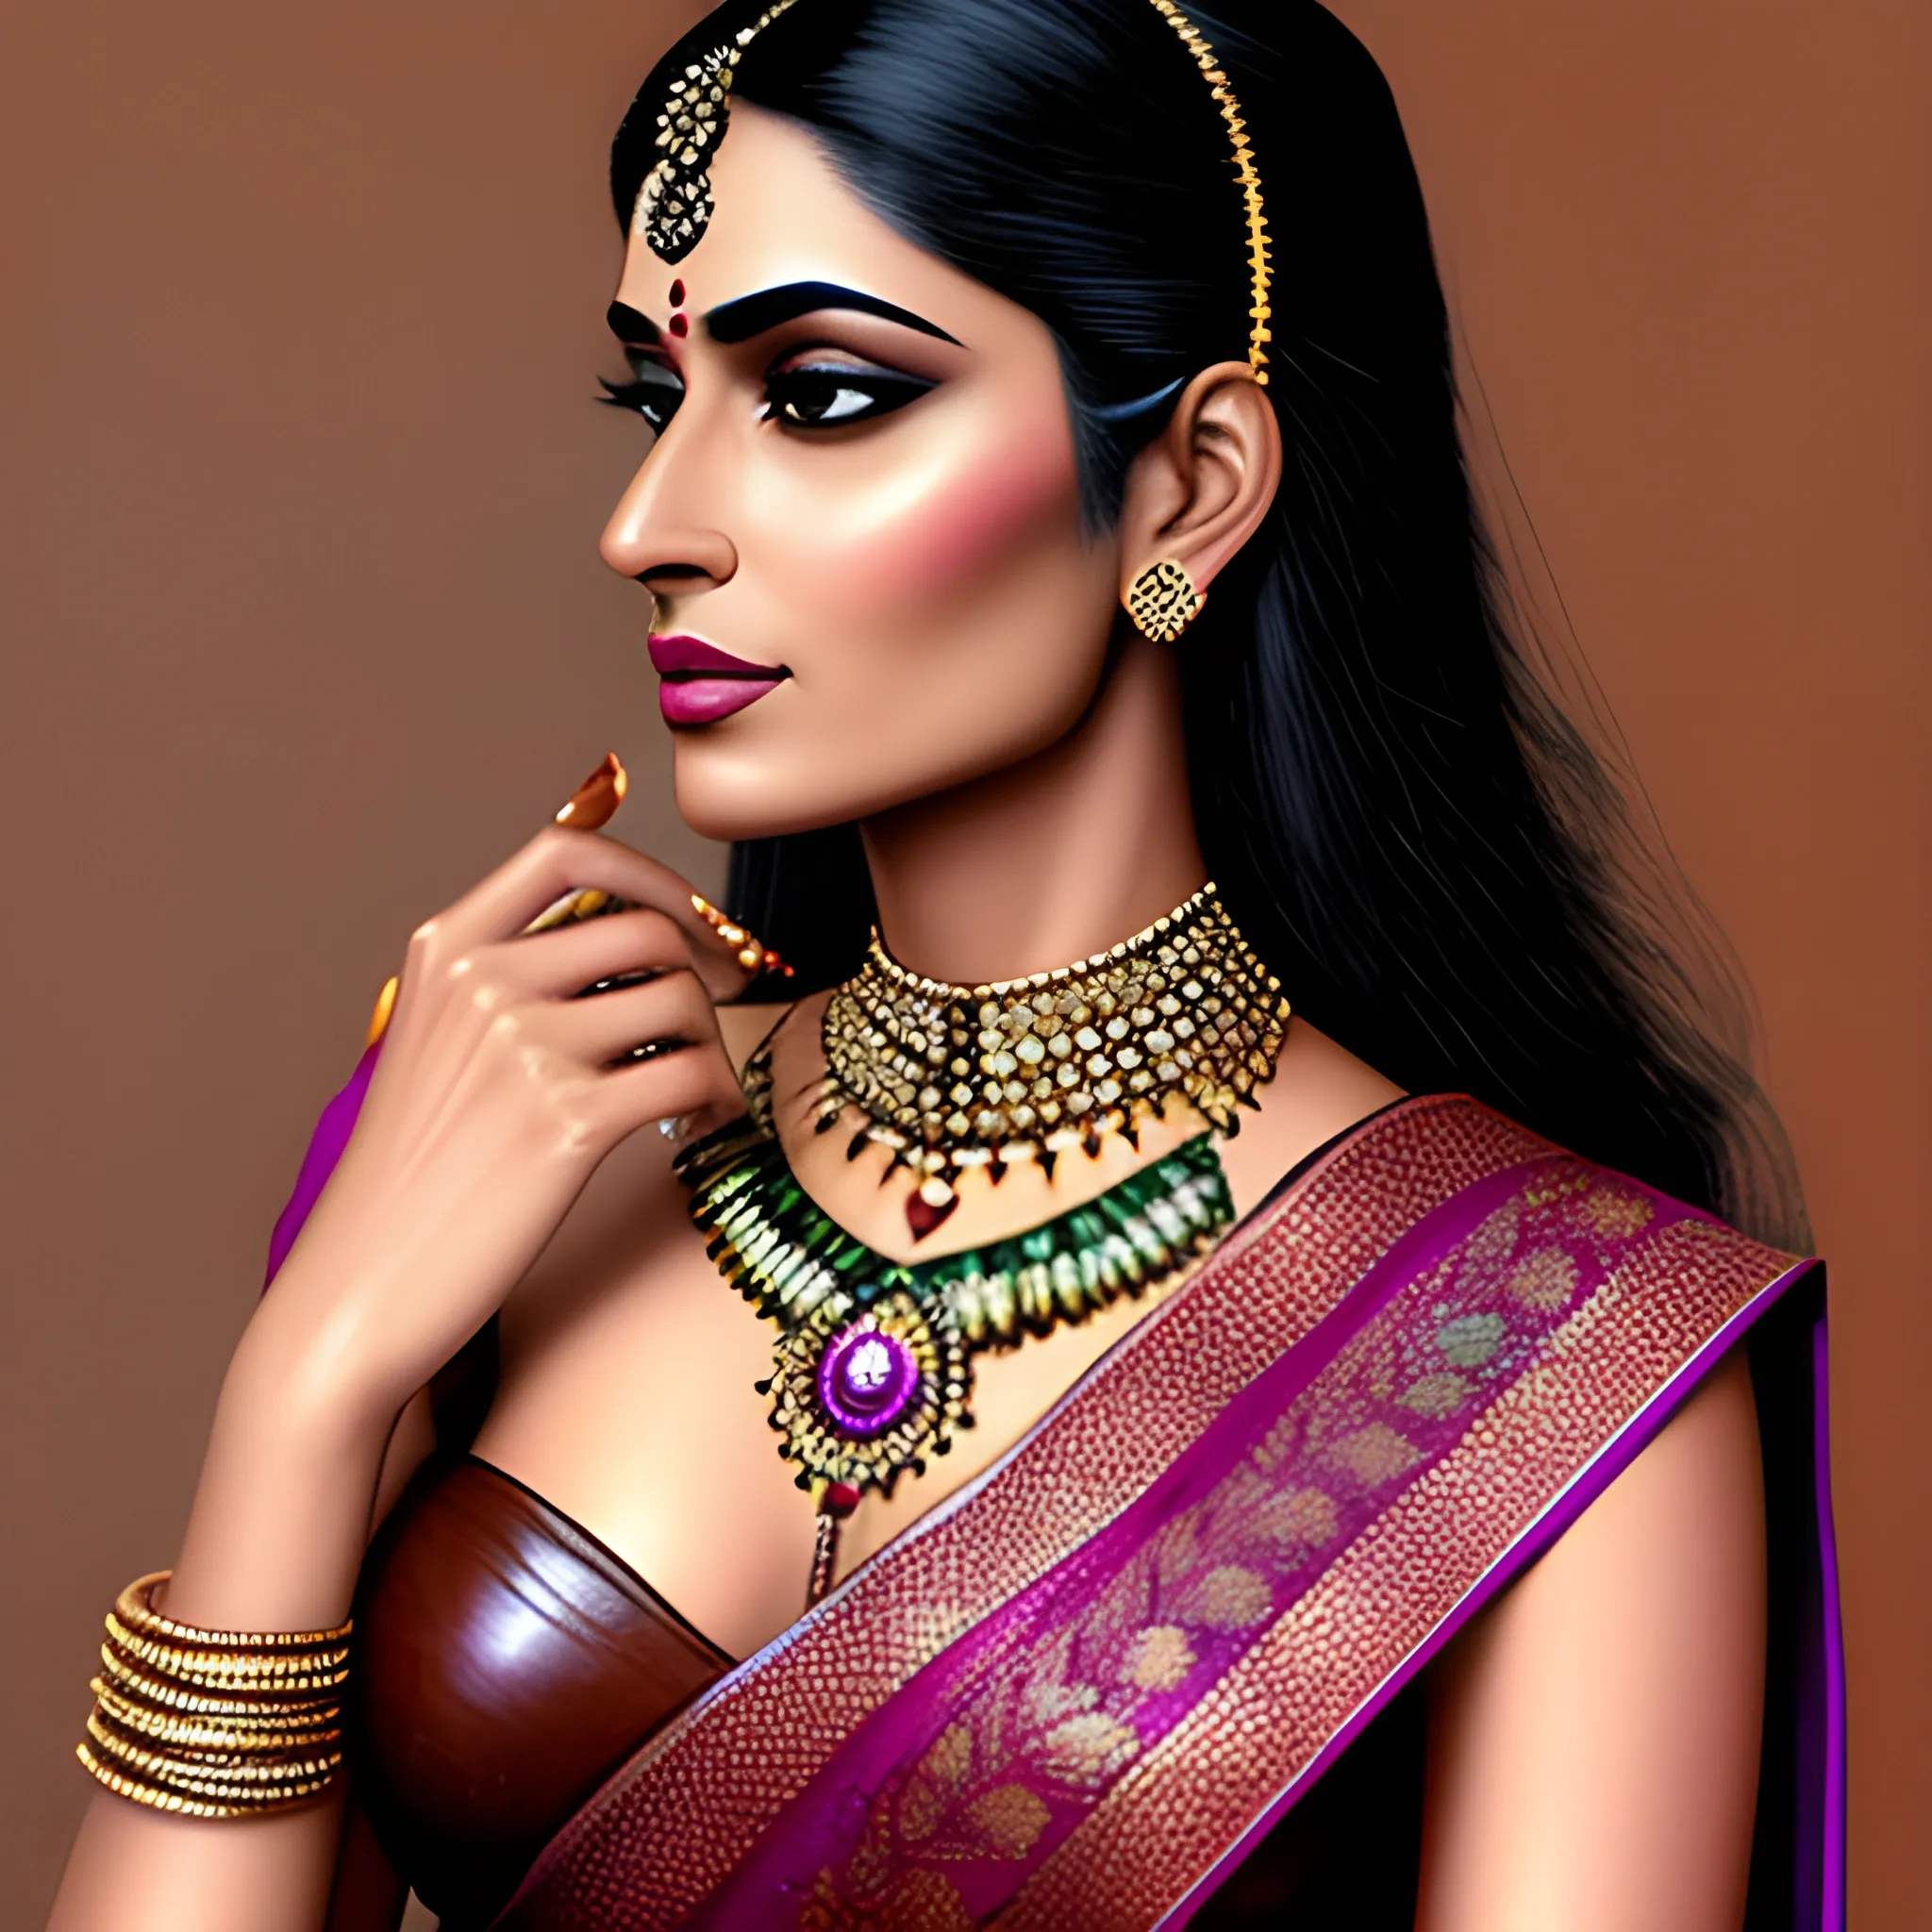 realistic photo of a beautiful young Indian woman in a sari::textured leather::<by Tillie Walden> ::
over-detailed::hyper-realistic::
4K Quality::style-500:::clear focus:: masterpiece ::background village::5 fingers on the hand, Oil Painting